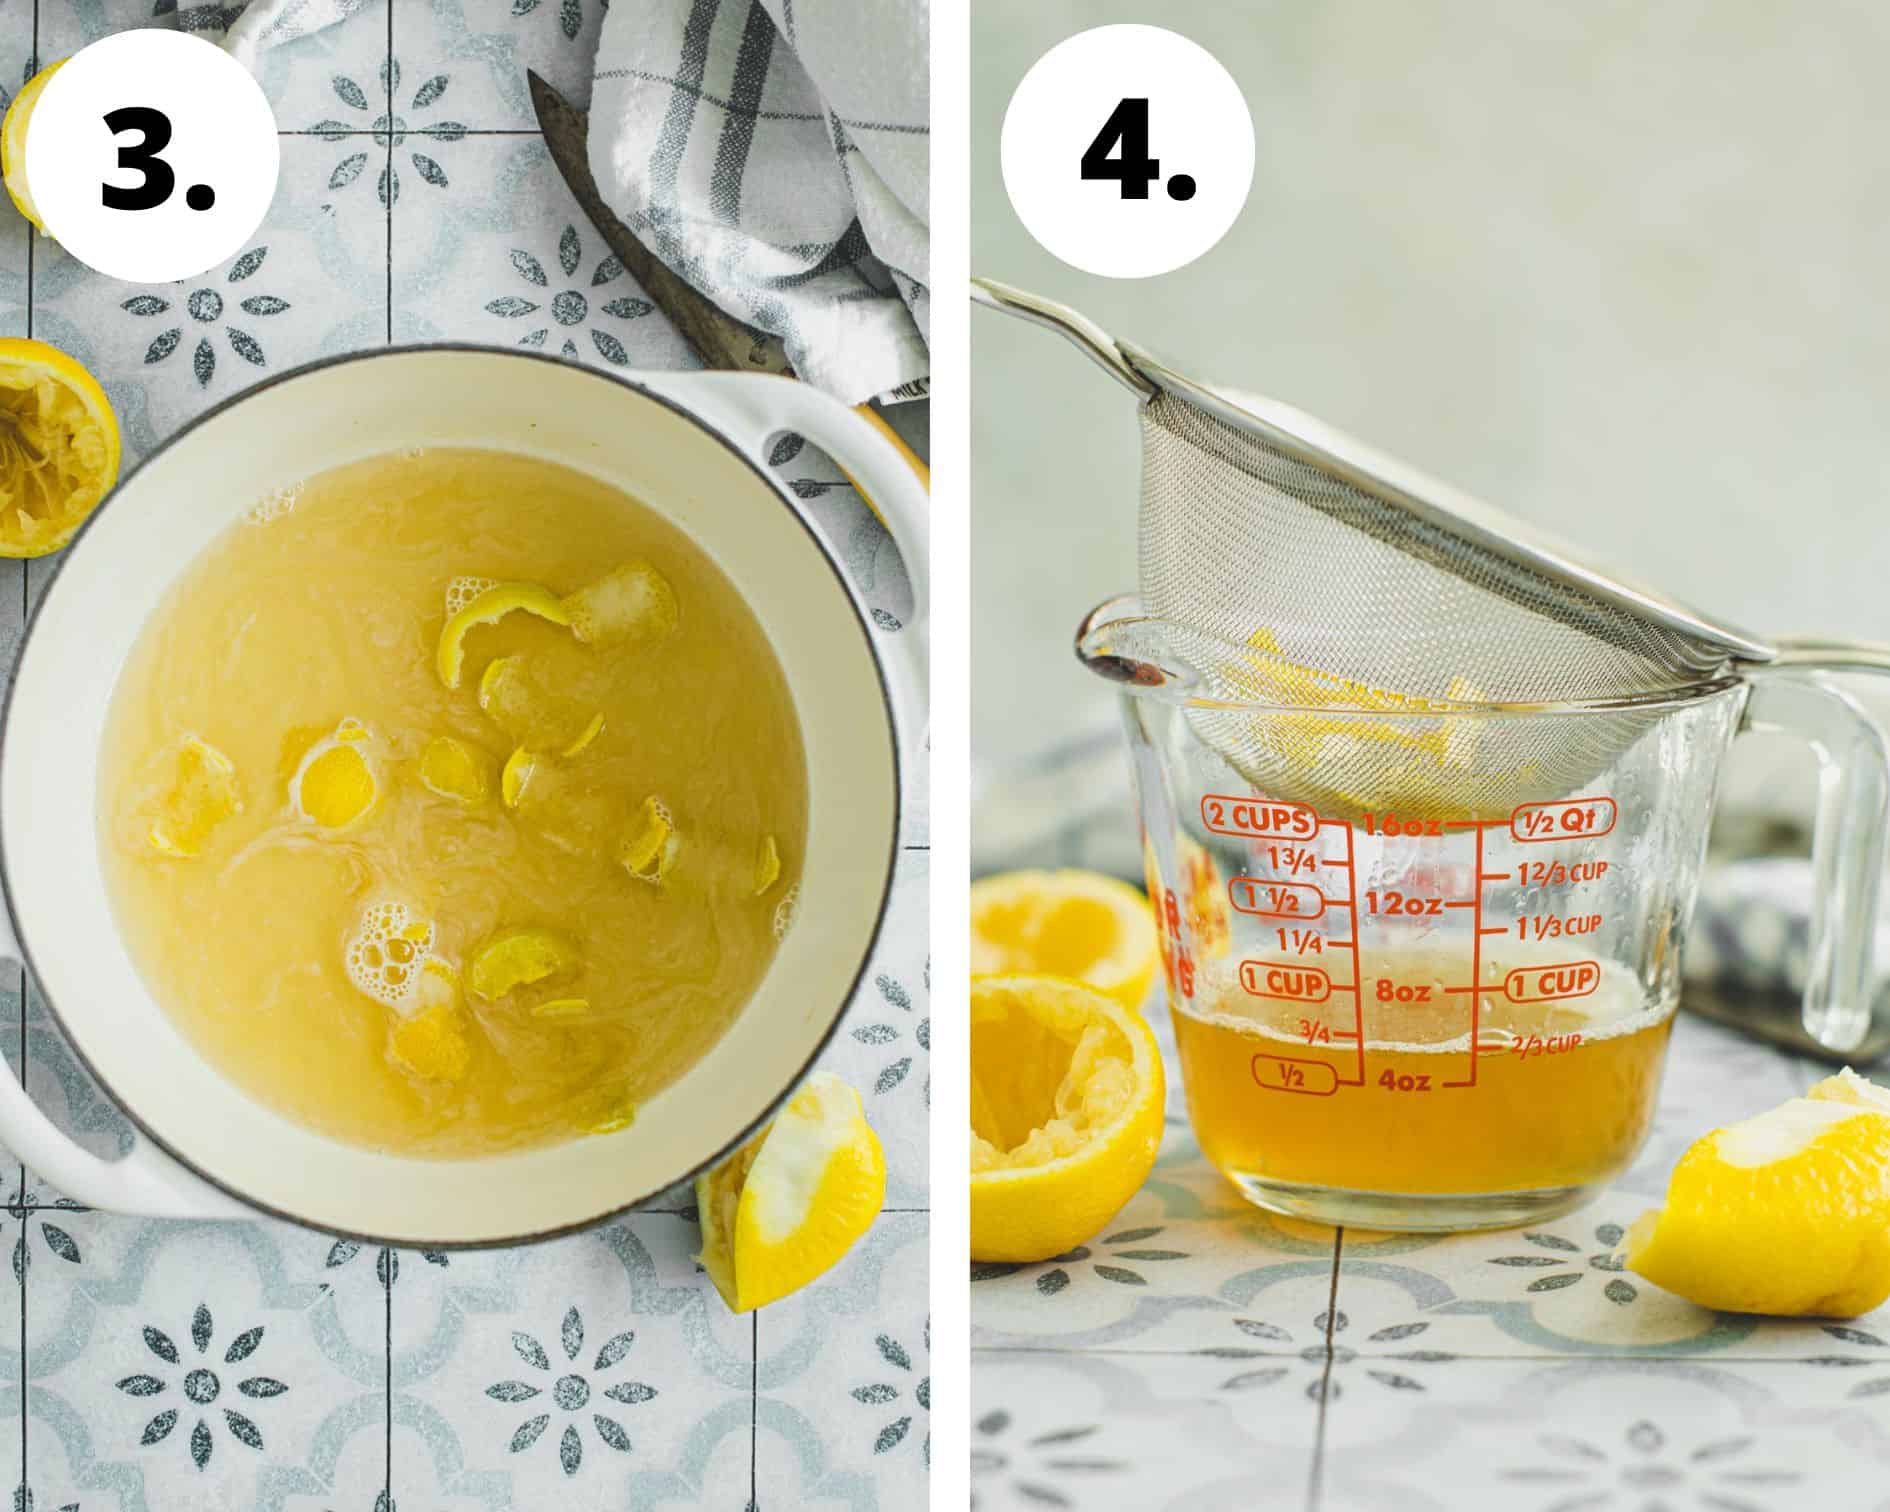 Lemon simple syrup process steps 3 and 4.